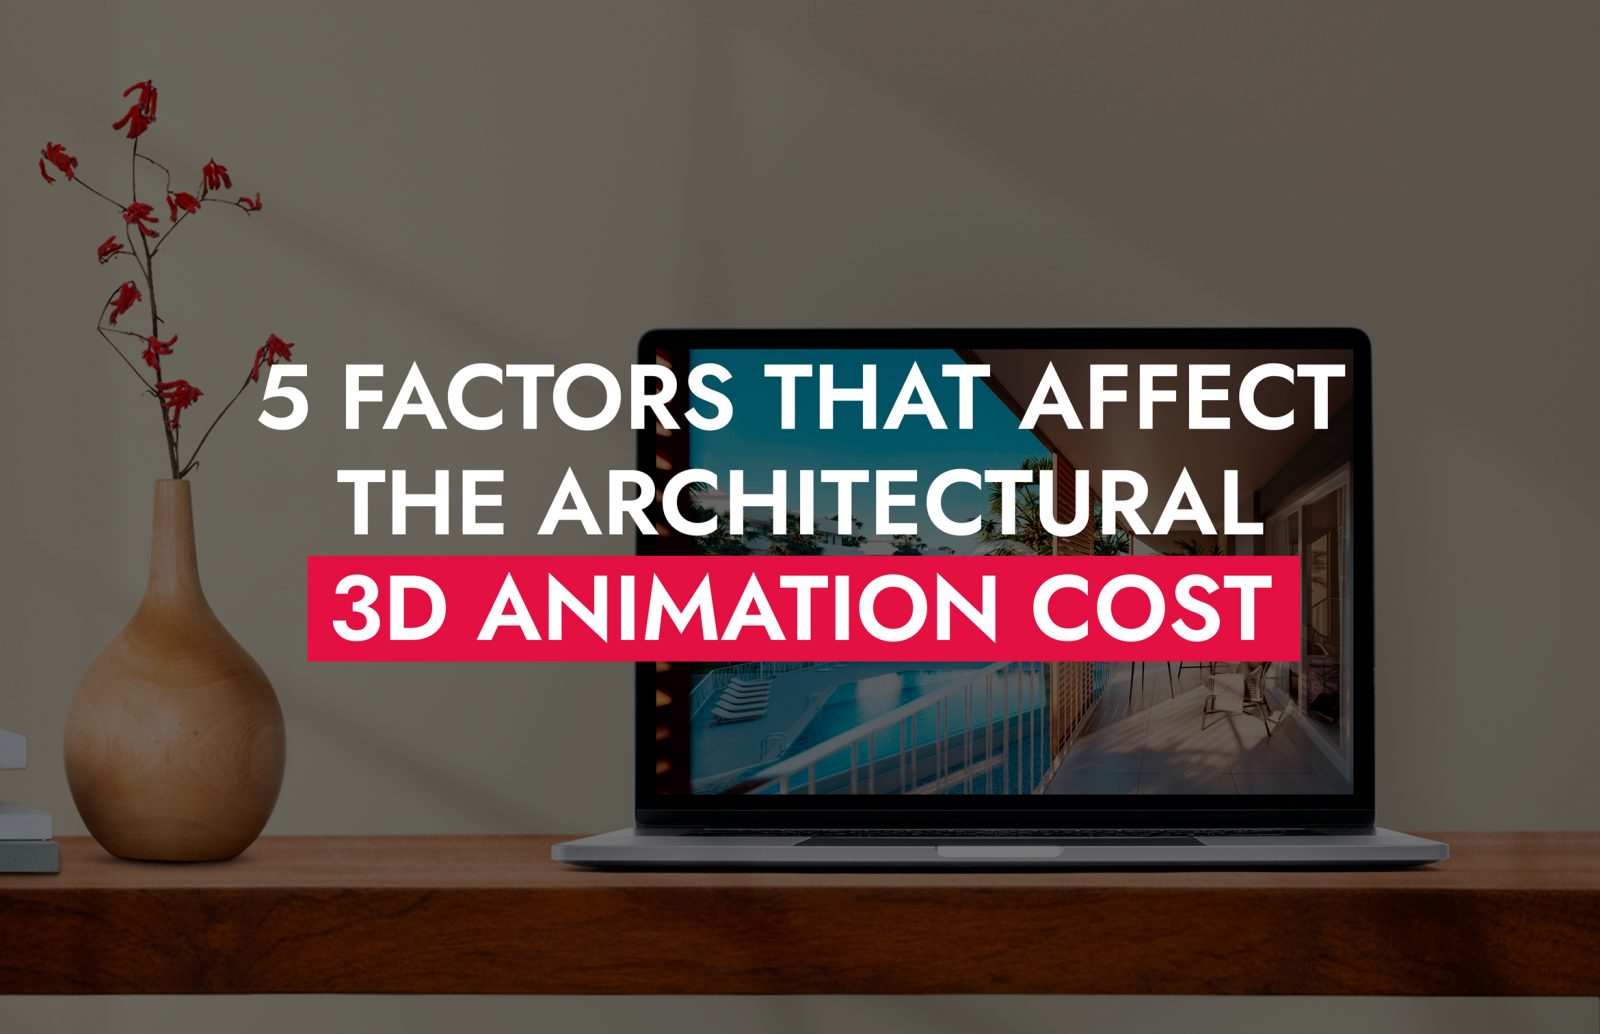 004 22 22 5 Factors That Affect The Architectural 3D Animation Cost